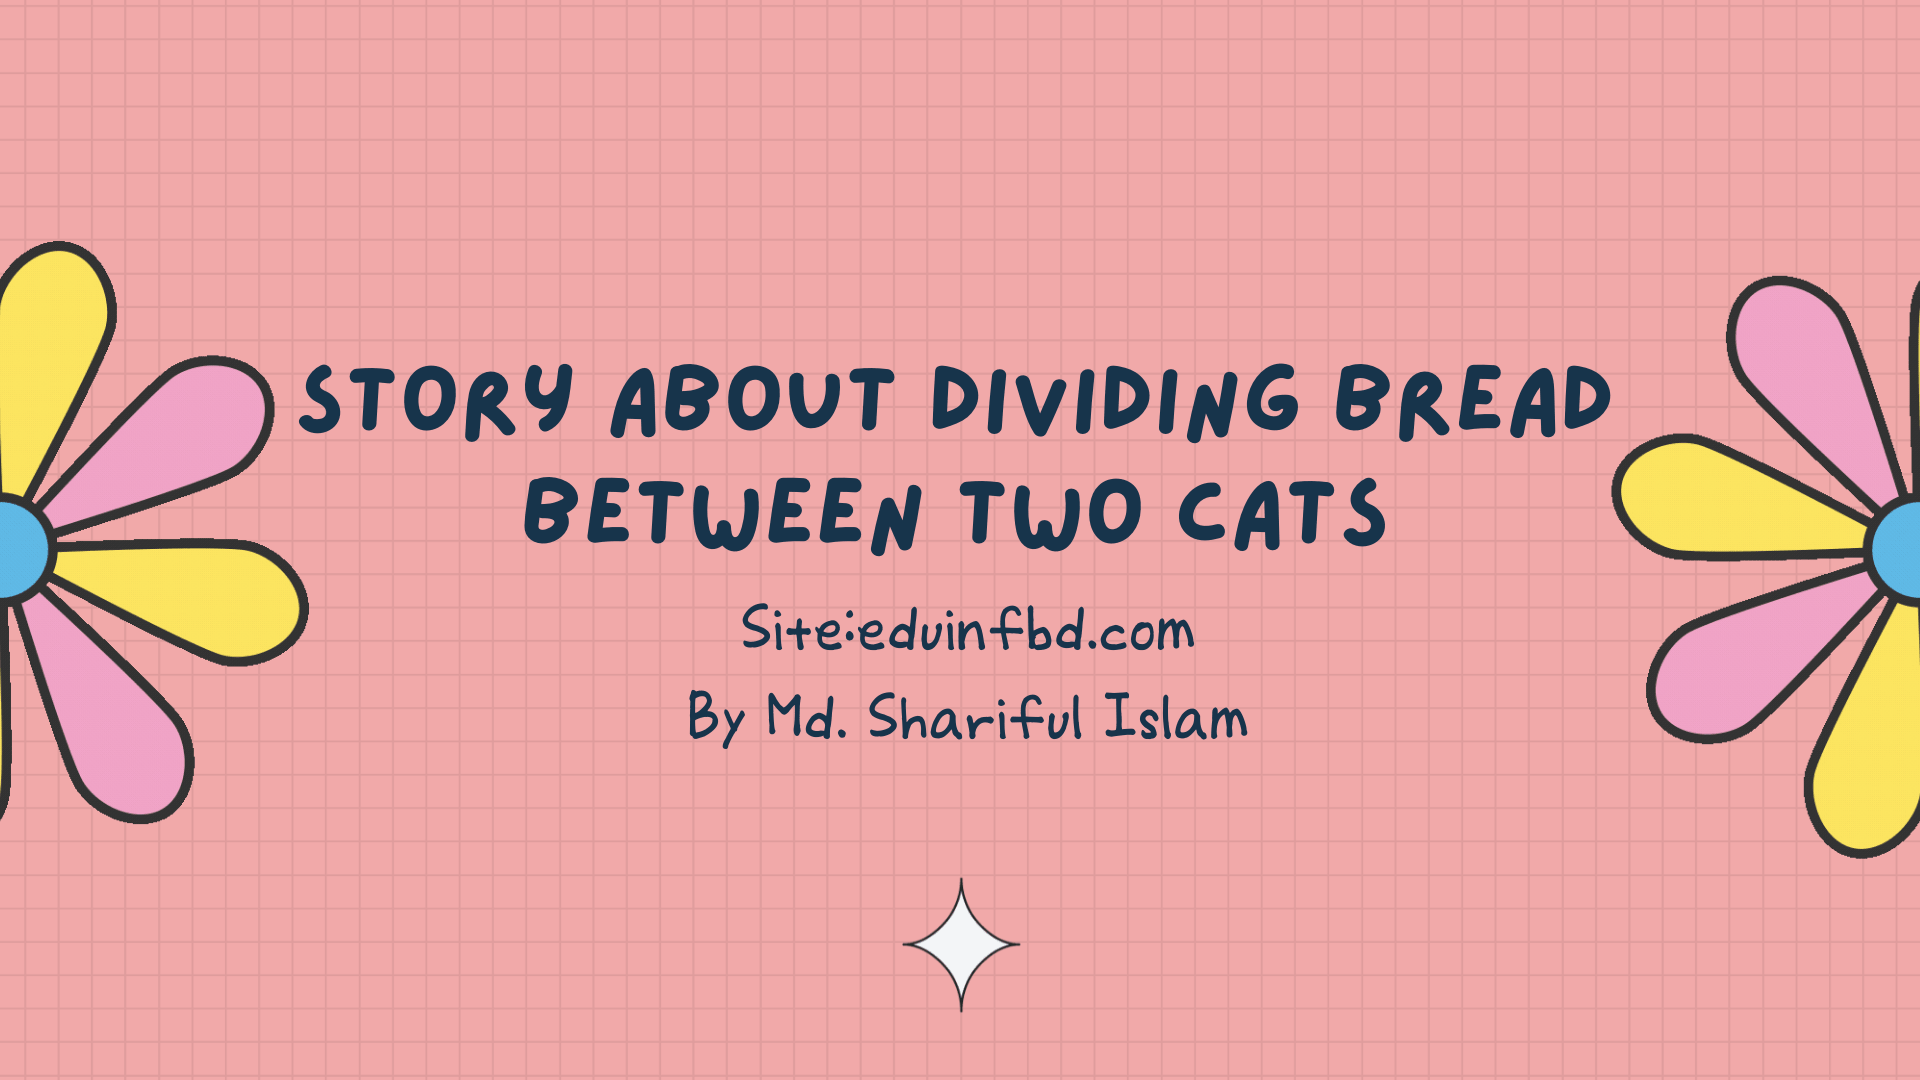 Story about dividing bread between two cats